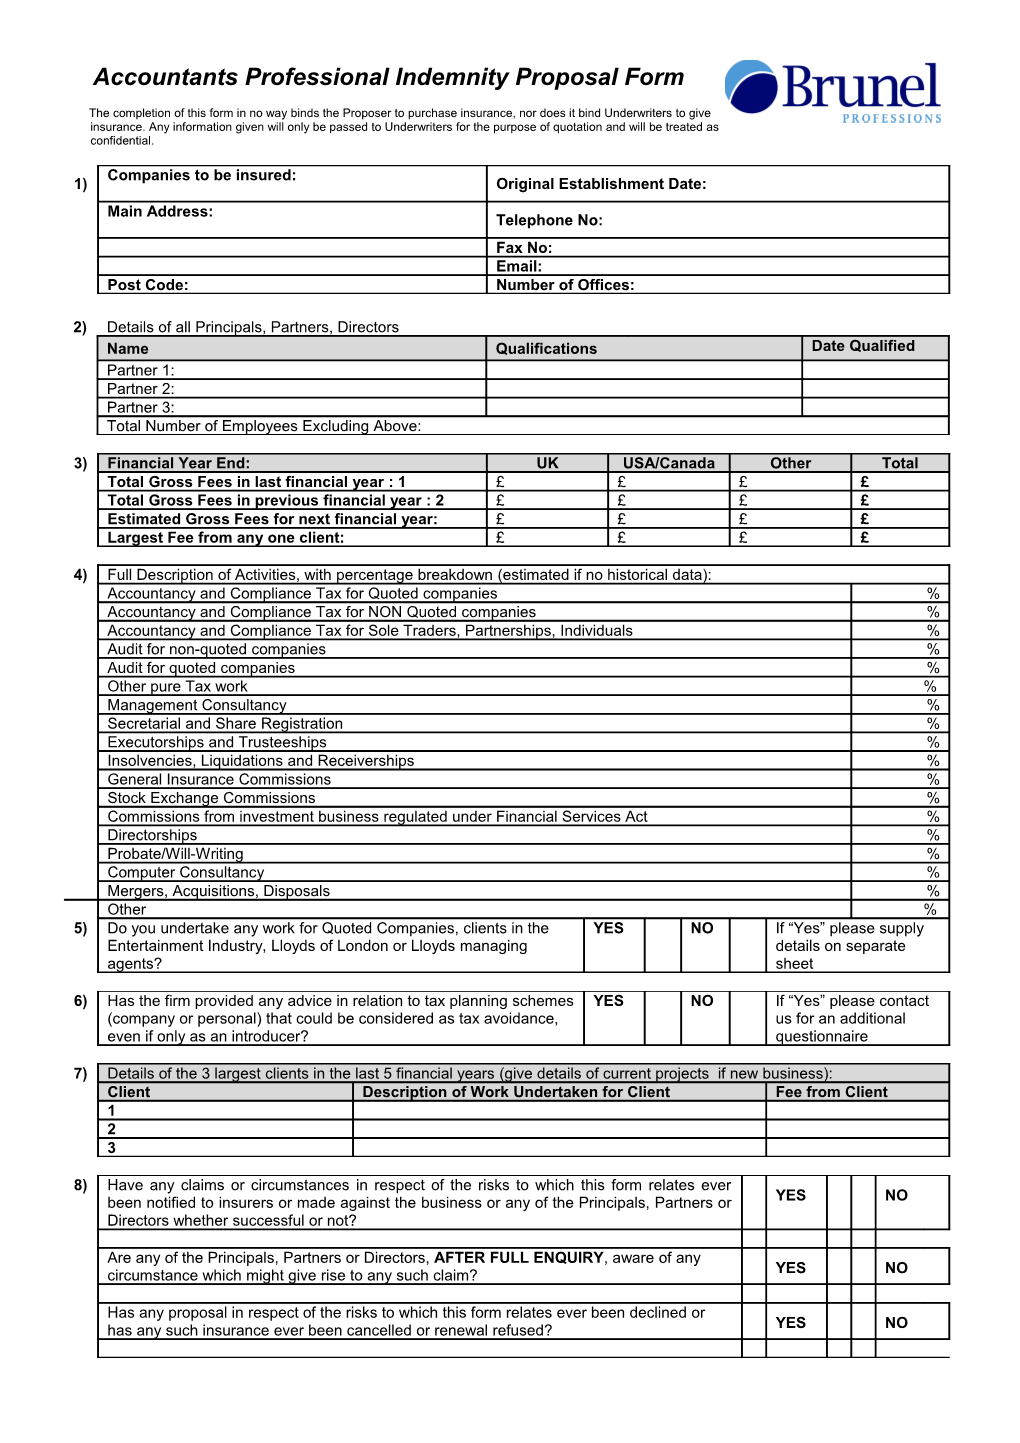 Accountants Professional Indemnity Proposal Form